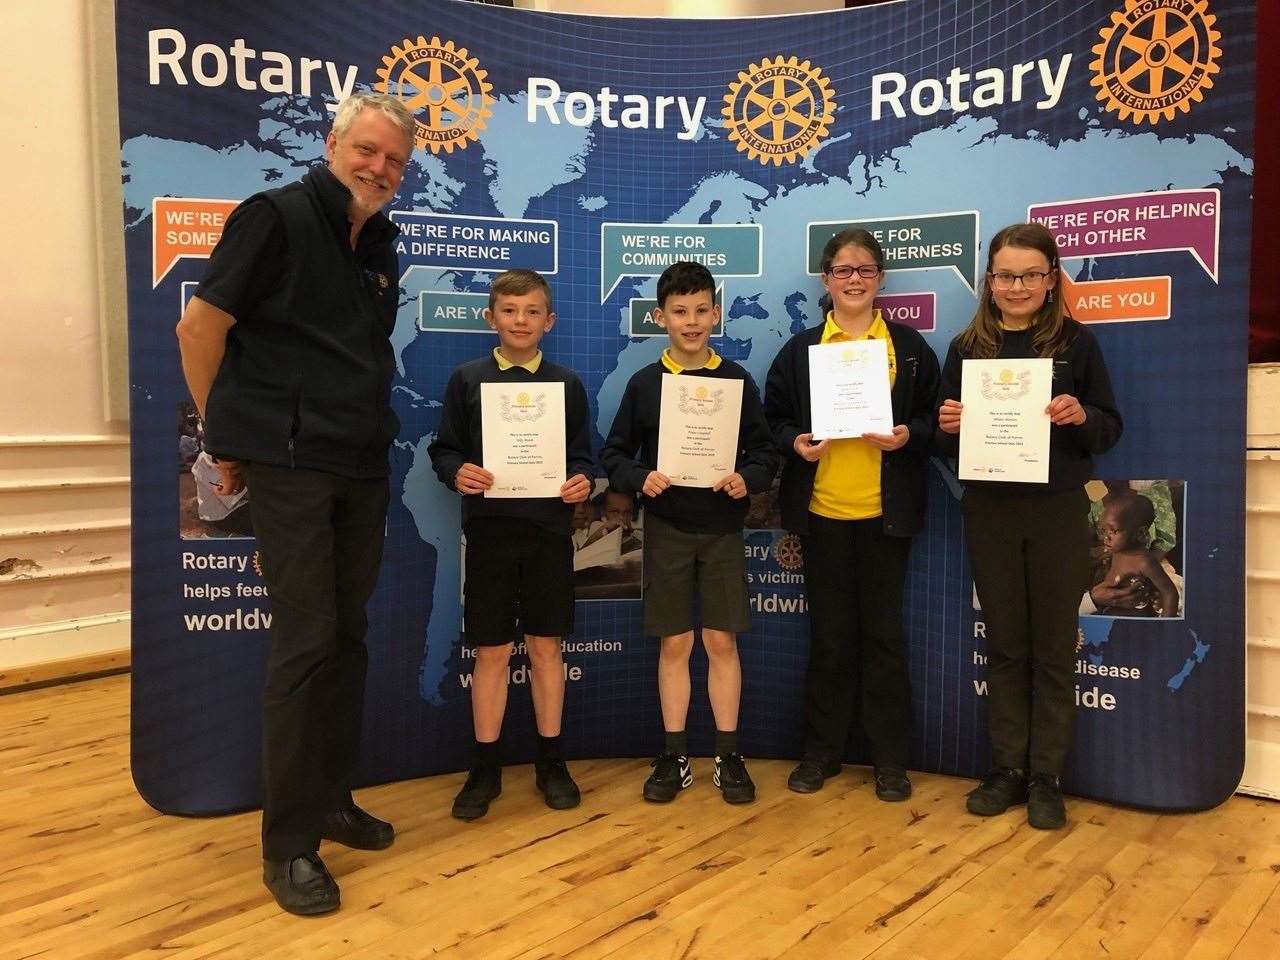 President elect, Brian Higgs presents a certificate to runners up Alves - Tobias Marsh (10), Fraser Campbell (10), Ruthie Harris (10) and Mhairi Manson (11).